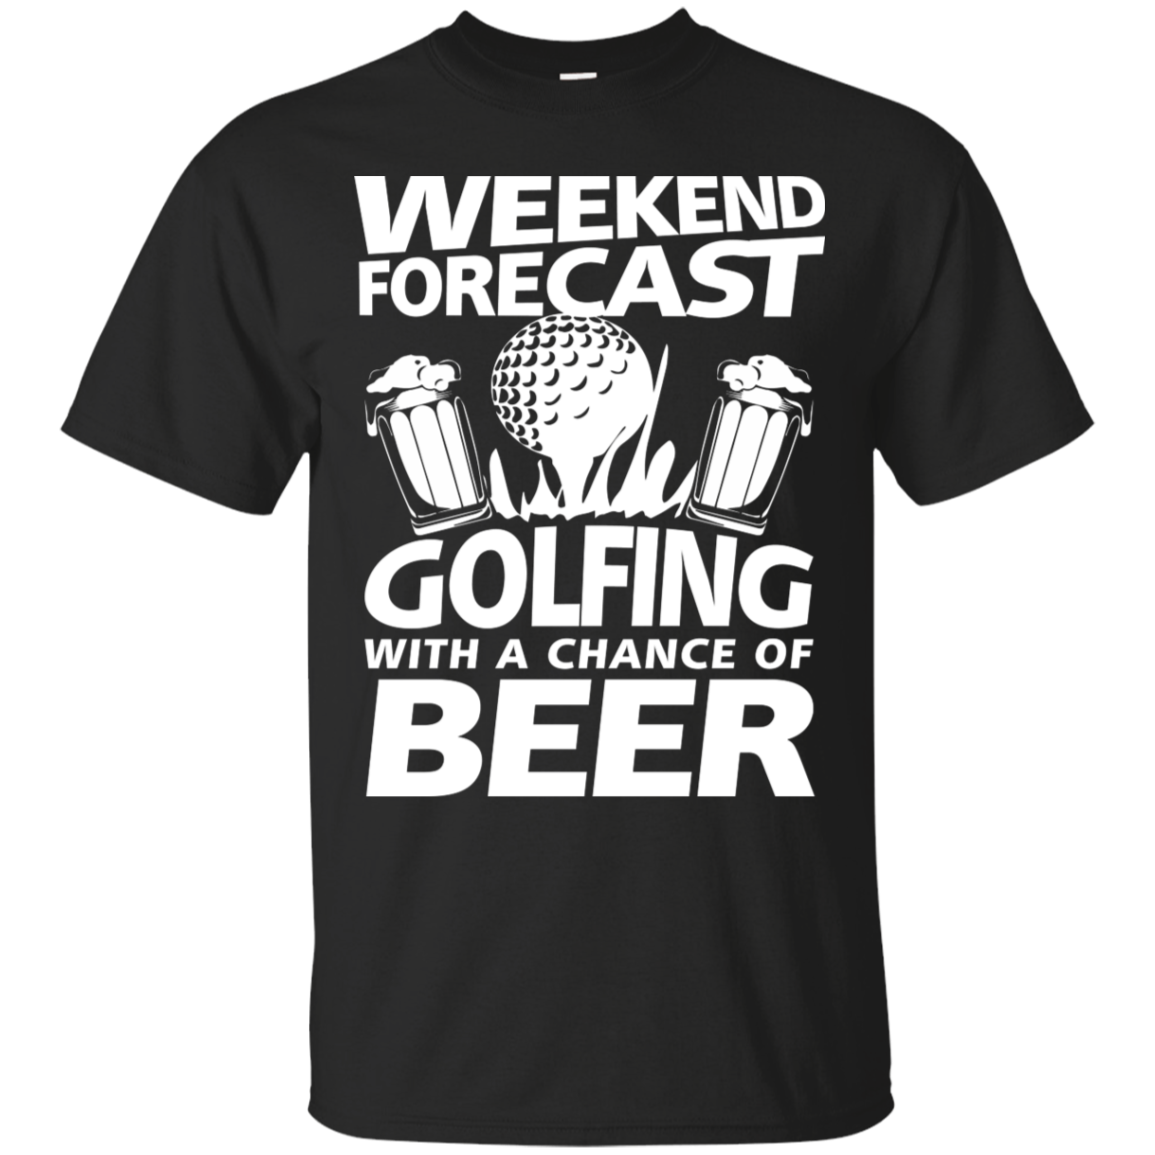 Weekend Forecast Golfing With A Chance Of Beer T-Shirt Apparel - The Beer Lodge